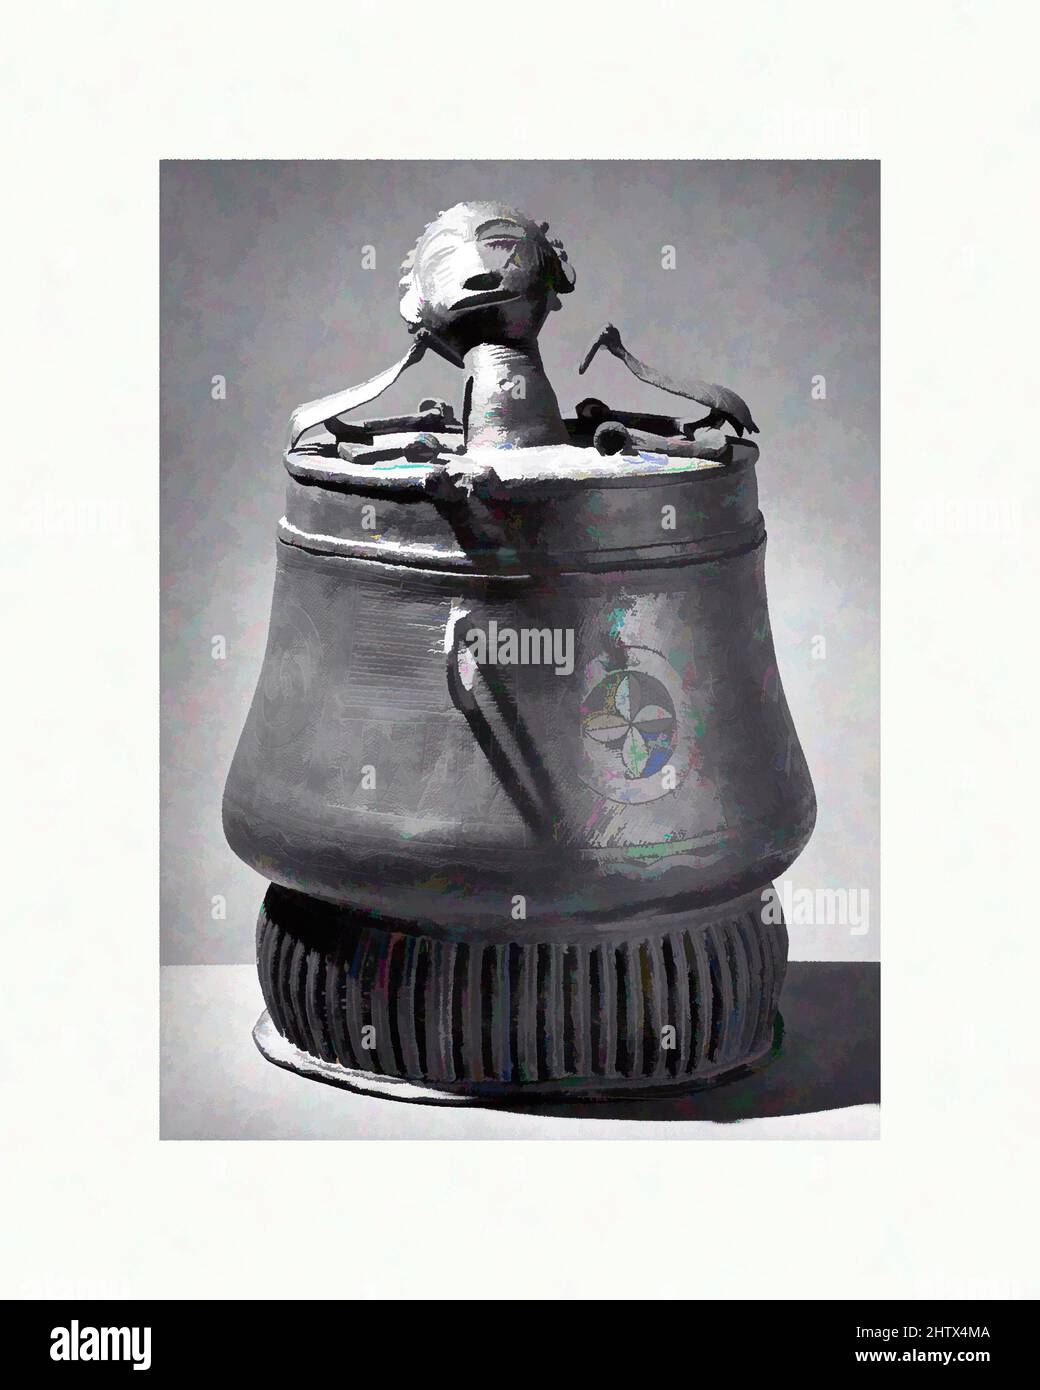 Art inspired by Lidded Vessel (Kuduo), 18th–19th century, Ghana, Akan peoples, Asante, Brass, H. 10 3/4 x W. 7 3/4 x D. 7 13/16 in. (27.3 x 19.7 x 19.9 cm), Metal-Containers, Ornate, cast brass vessels known as kuduo were the possessions of kings and courtiers in the Akan kingdoms, Classic works modernized by Artotop with a splash of modernity. Shapes, color and value, eye-catching visual impact on art. Emotions through freedom of artworks in a contemporary way. A timeless message pursuing a wildly creative new direction. Artists turning to the digital medium and creating the Artotop NFT Stock Photo